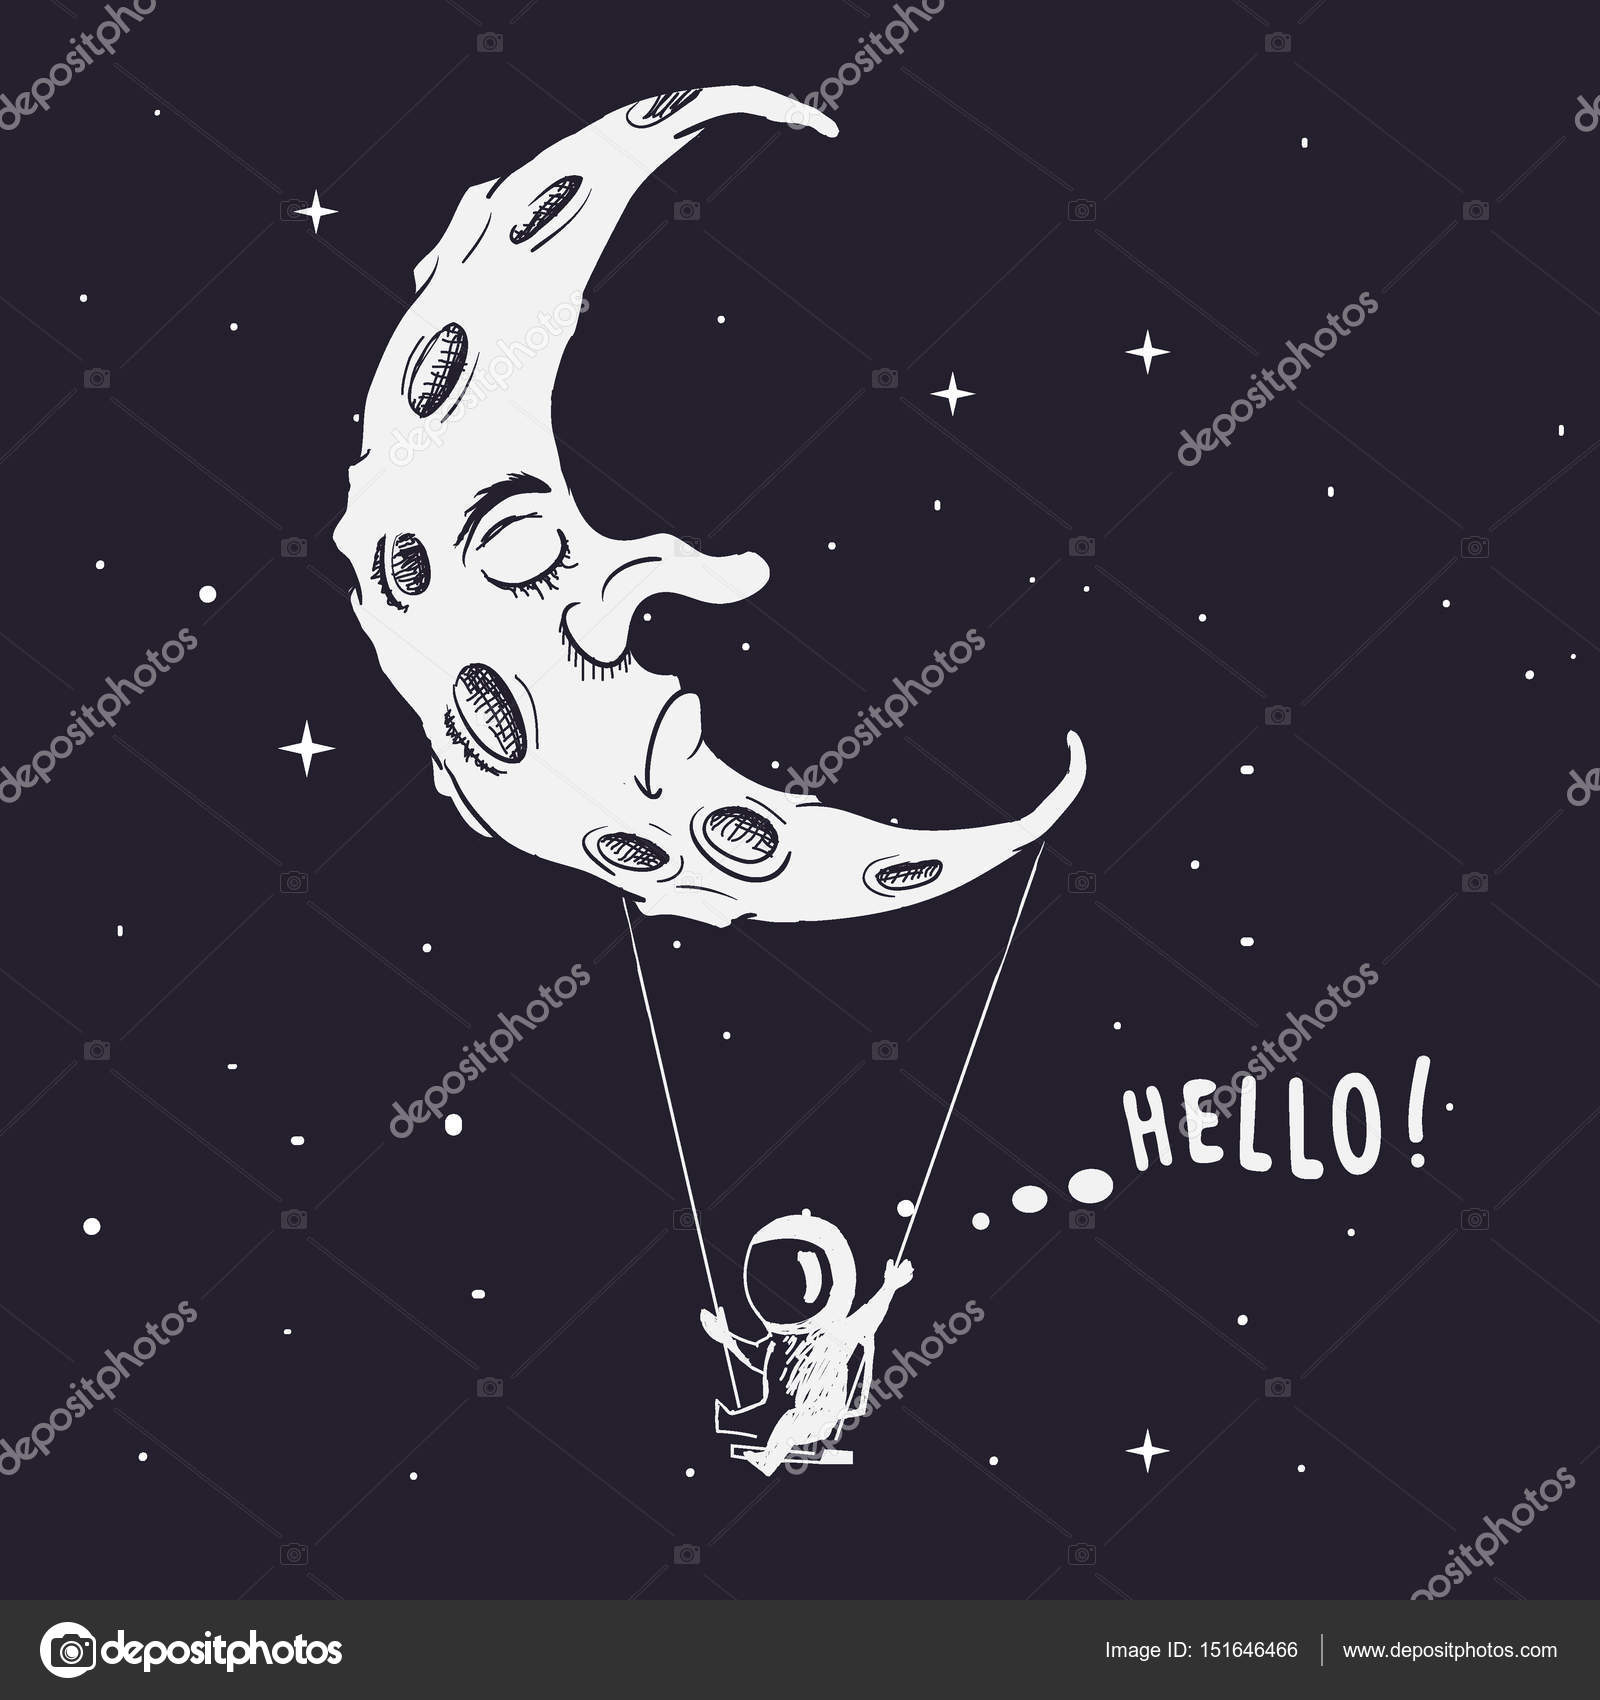 Spaceman on swing boat with moon. — Stock Vector © mirquurius #151646466